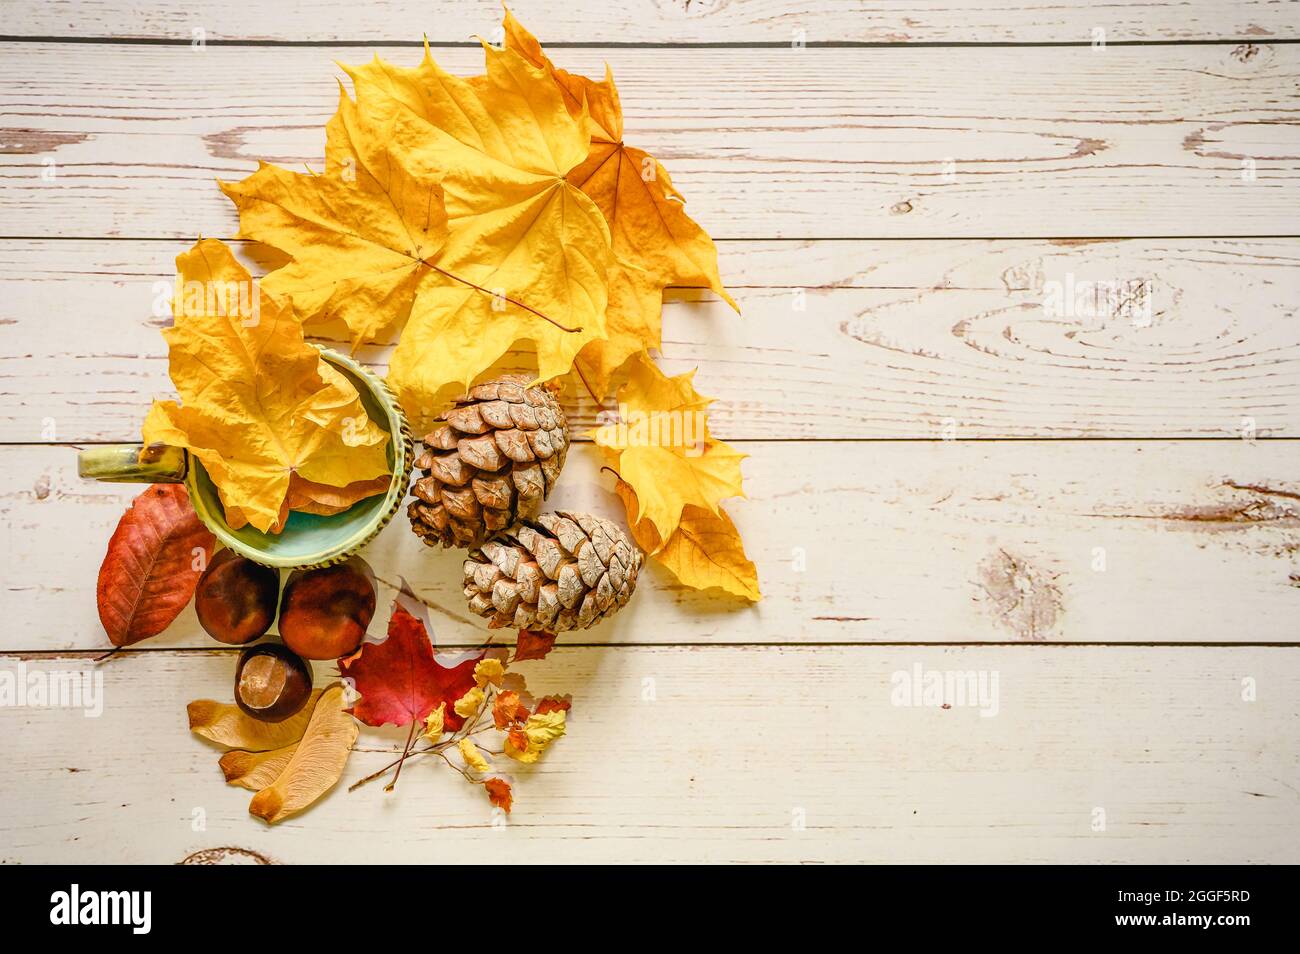 a set of fall materials for children's creativity and crafts on a wooden table. orange fallen autumn maple leaves and seeds, cedar cones, twigs and re Stock Photo